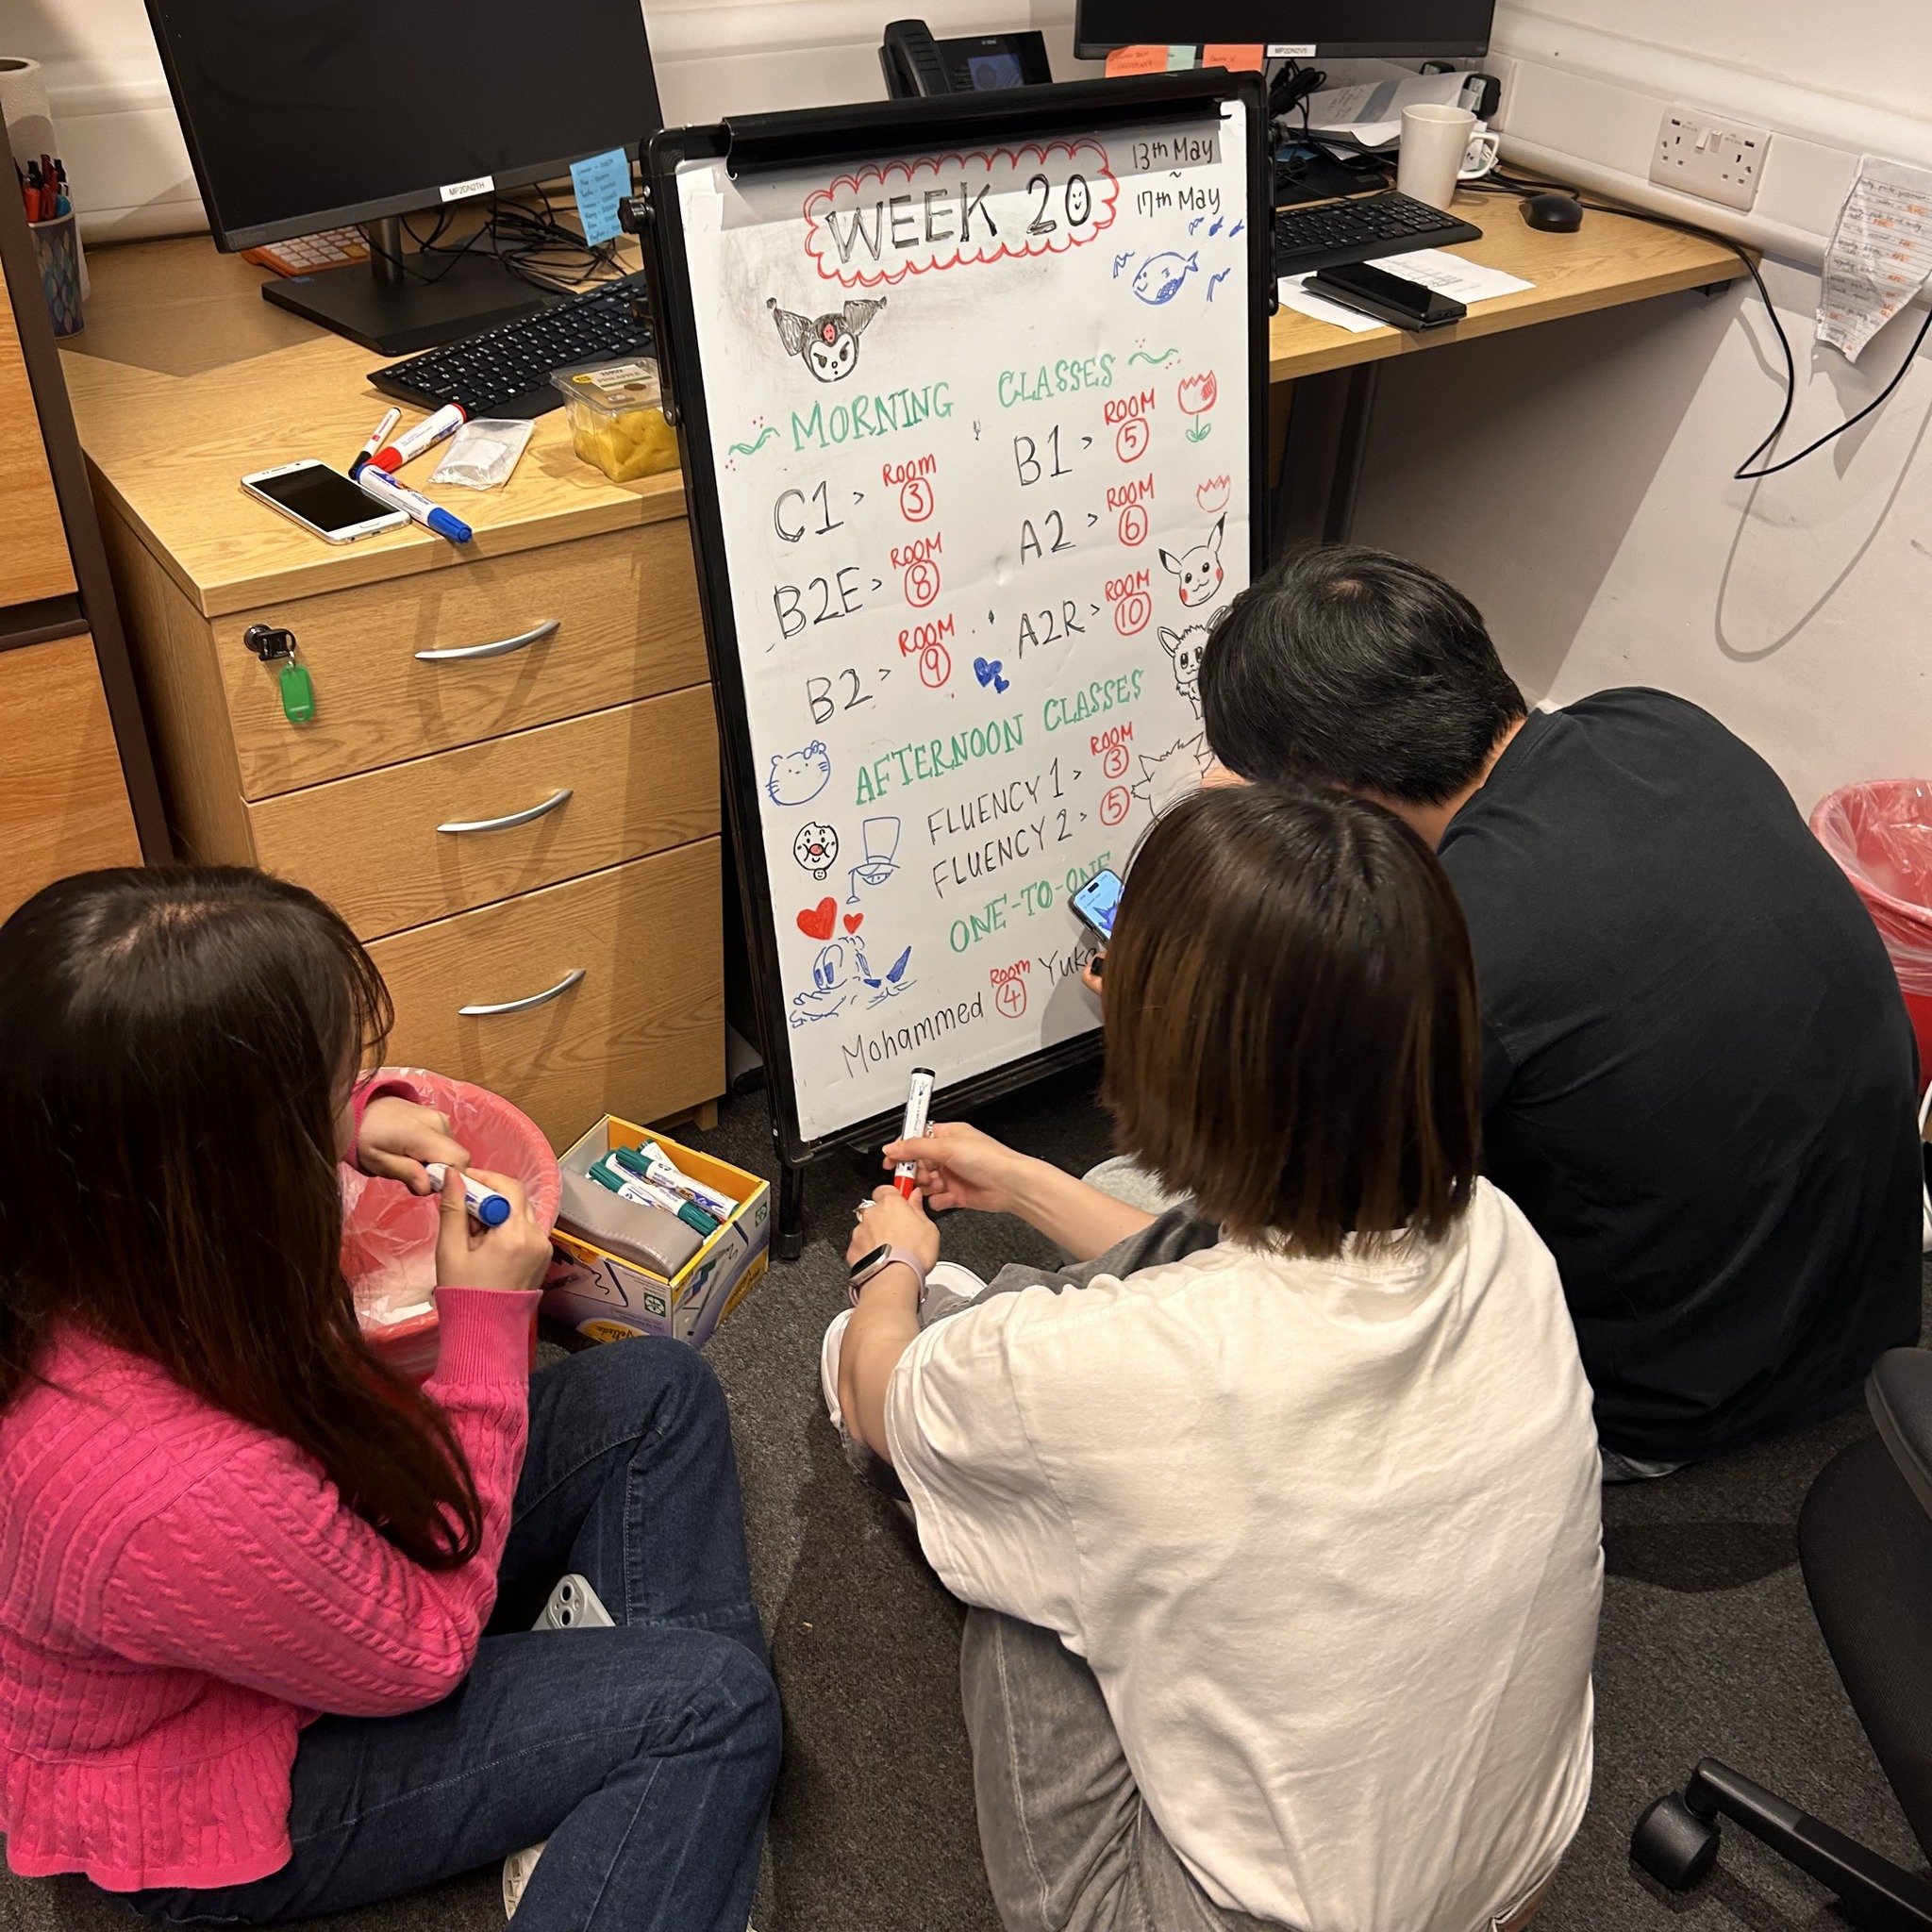 ✨Happy Monday✨

Our students designing and decorating our weekly class list😇

Interested in studying in one of these classes here at OSE?
Click here: https://www.oxfordschoolofenglish.com/
Or email: info@oxfordschoolofenglish.com for more informatio